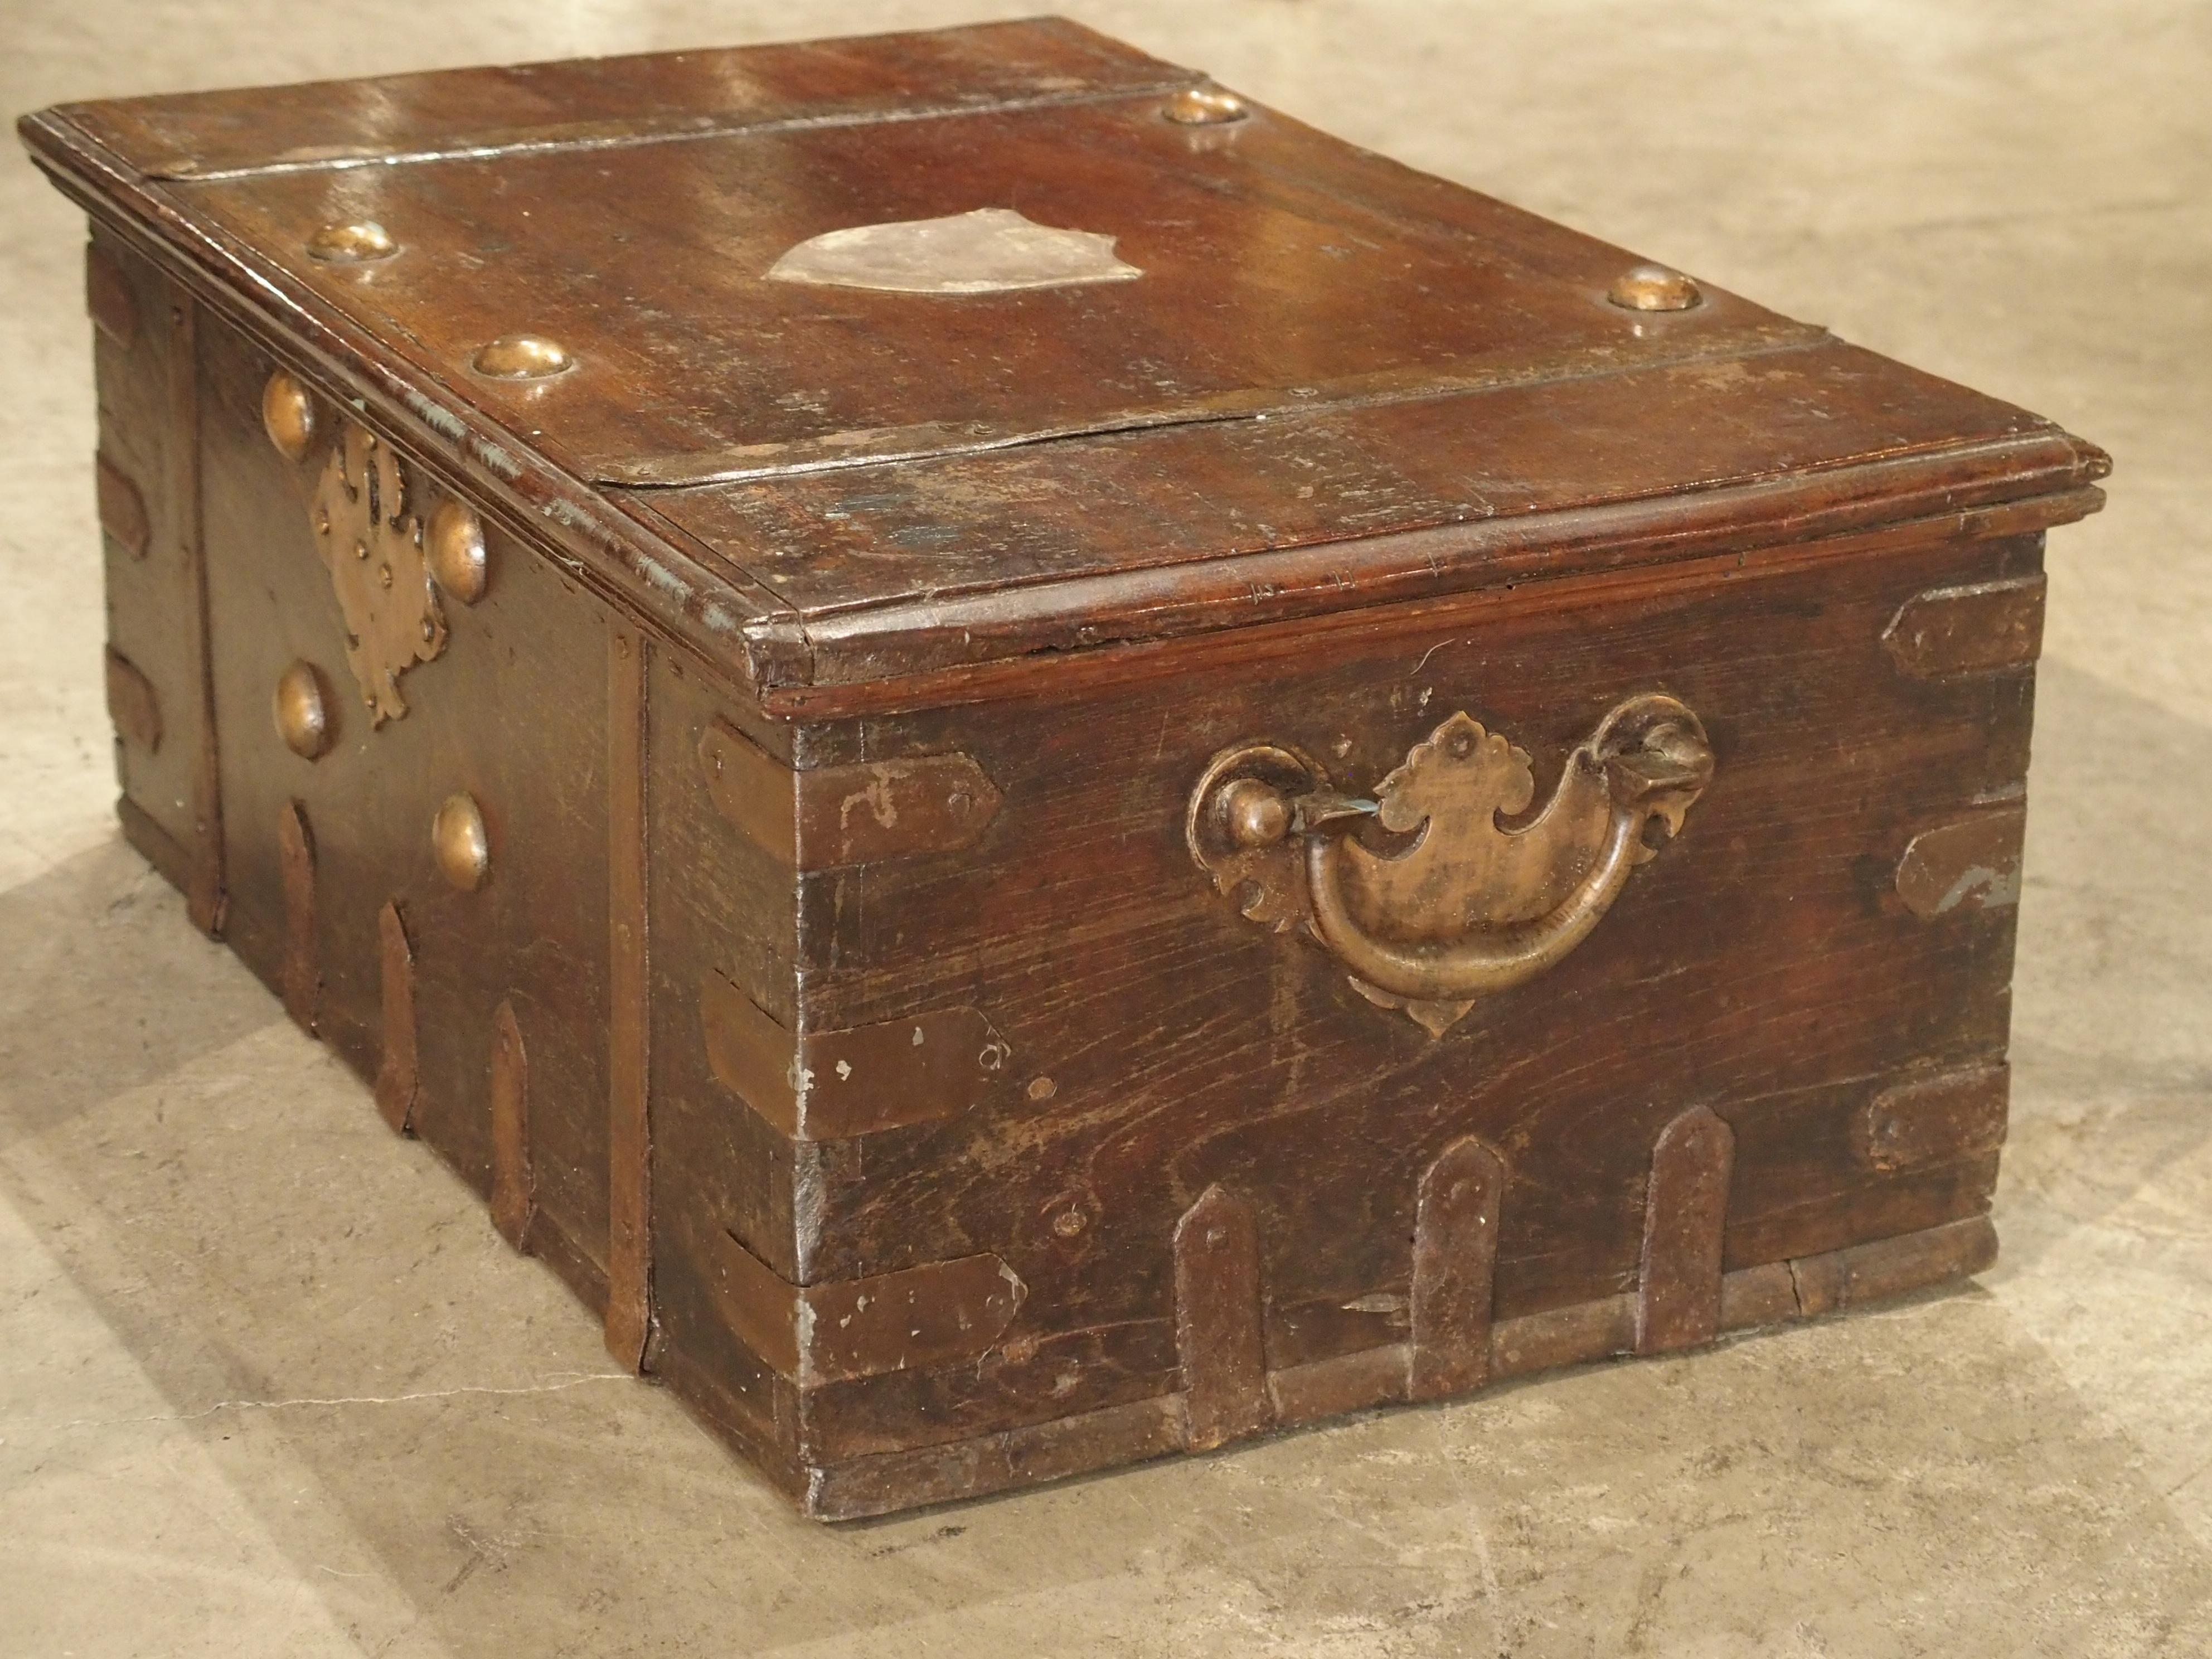 Kenyan Antique Iron Mounted Mahogany Trunk with Copper Handles, 19th Century